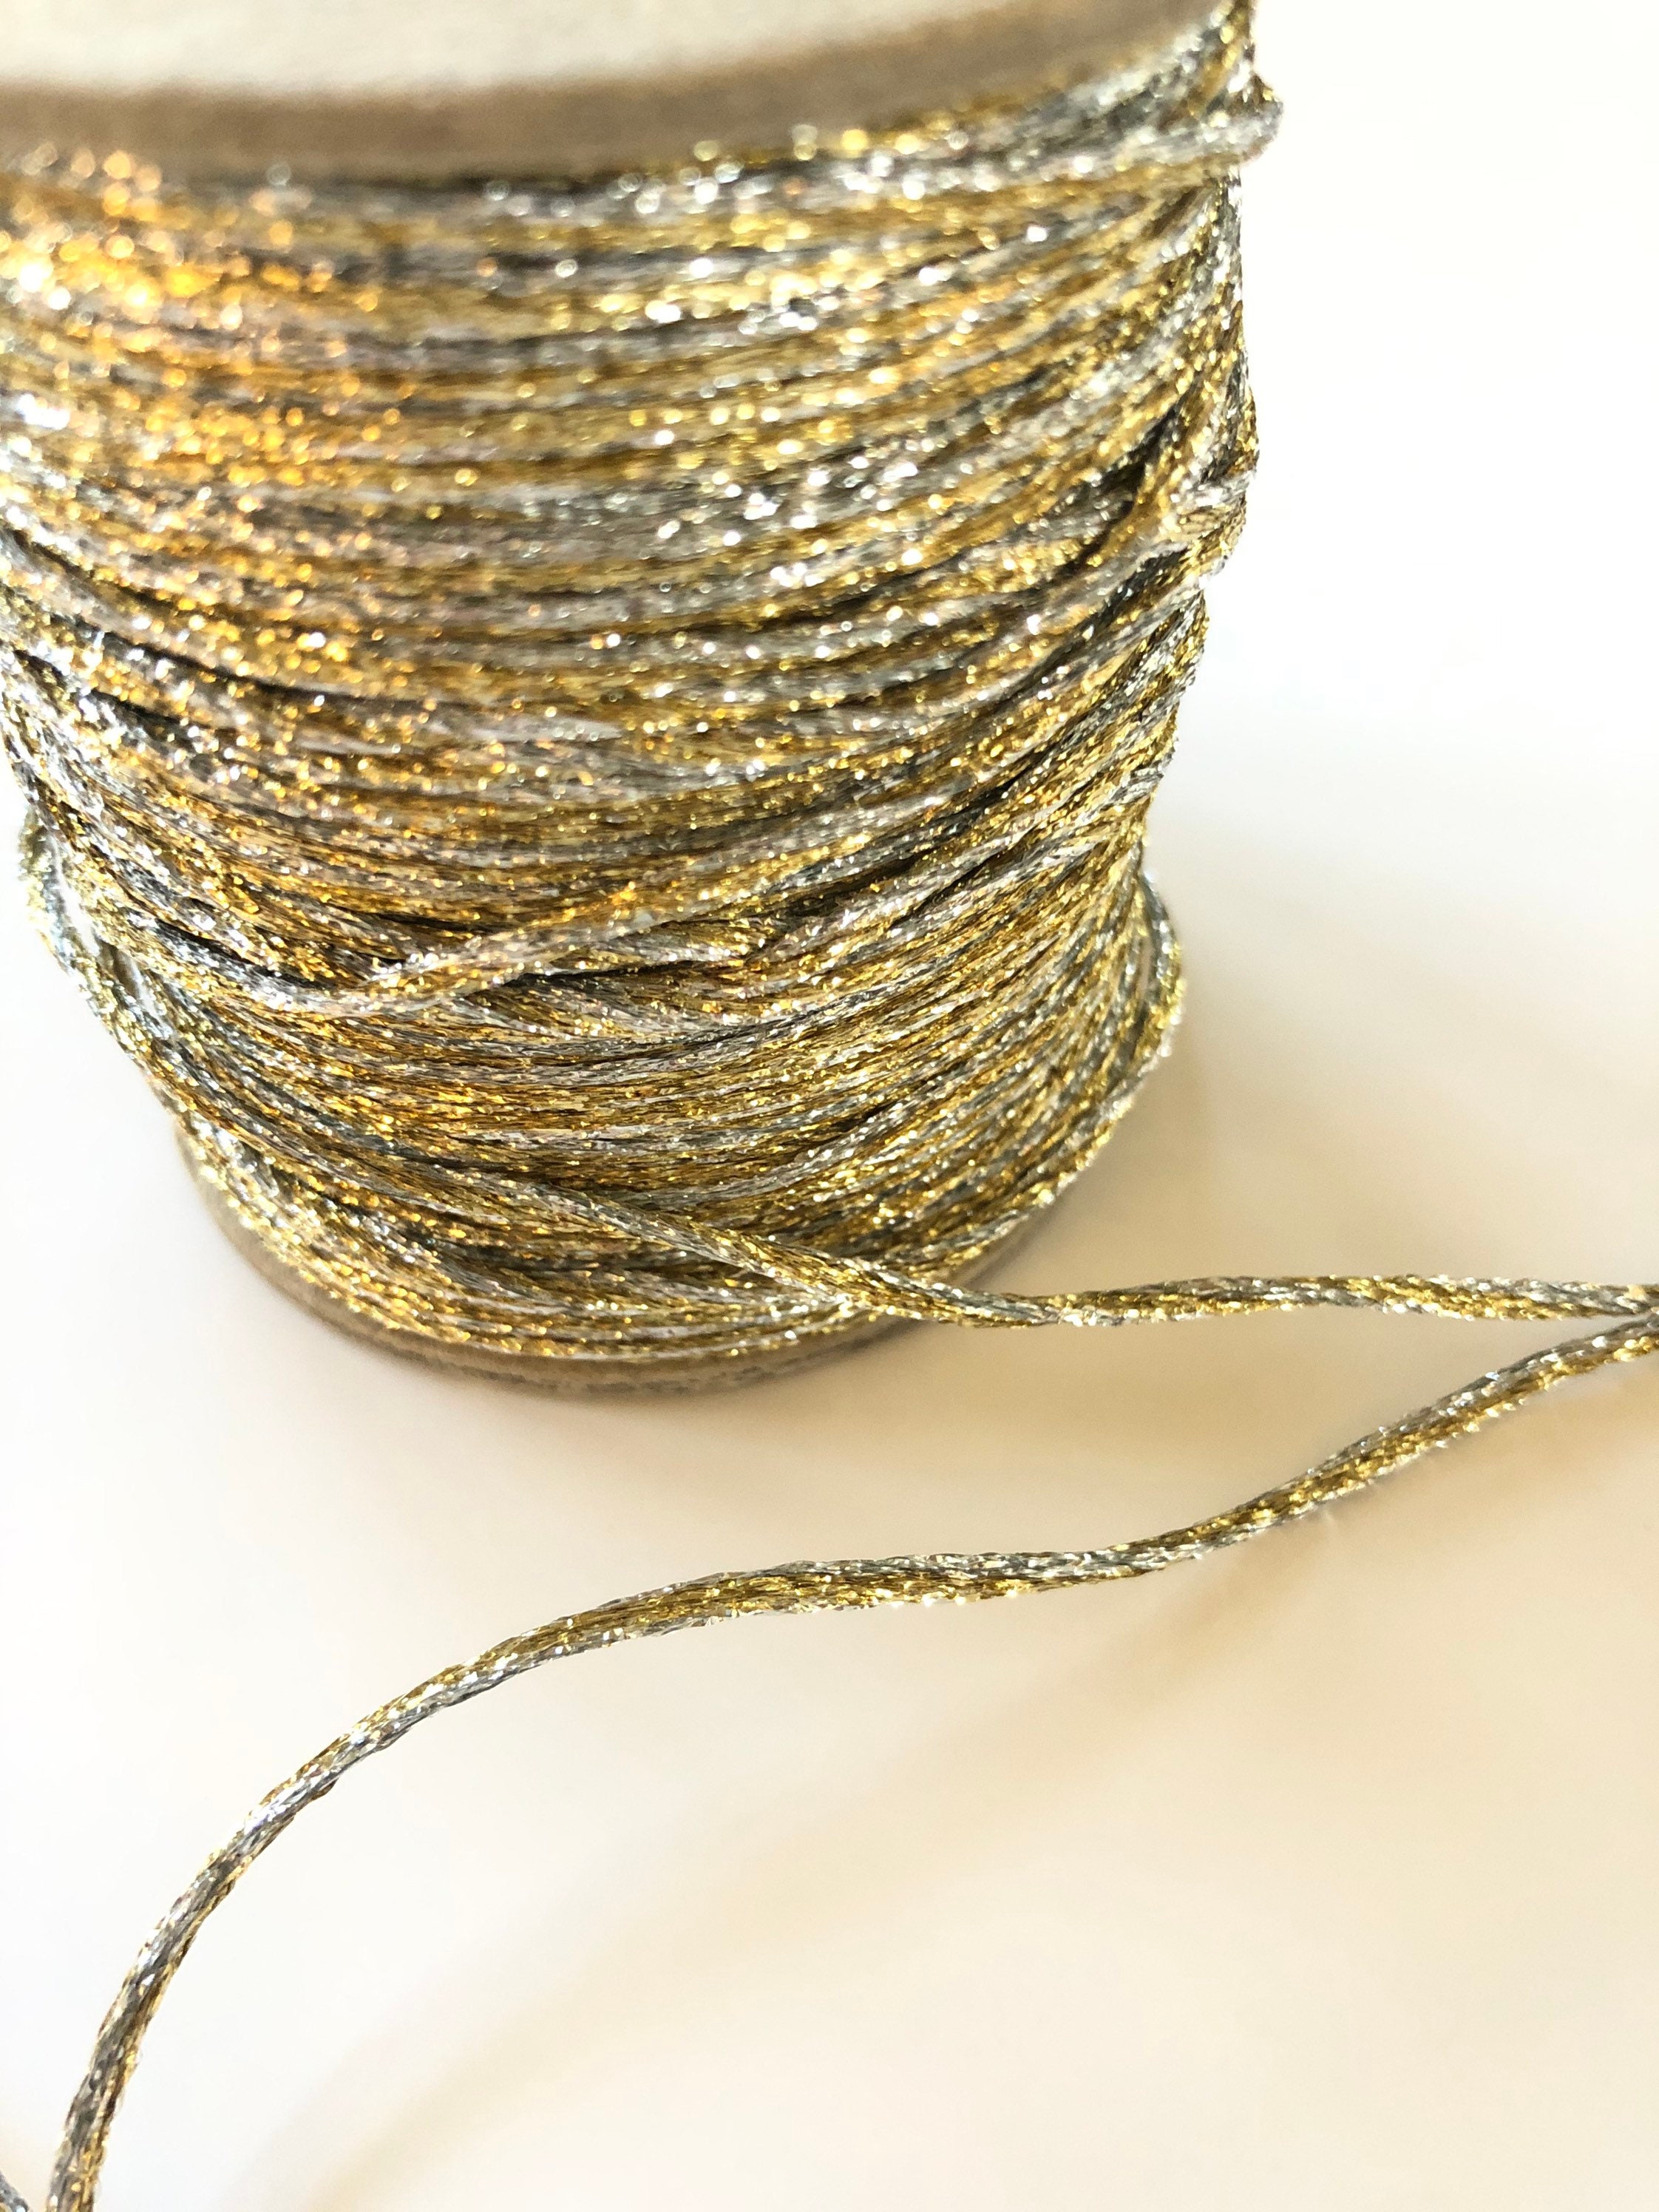 Mandala Crafts Metallic Cord Tinsel String Rope for Ornament Hanging, Decorating, Gift Wrapping, Crafting - Gold / Non Elastic 2mm 100 Yards